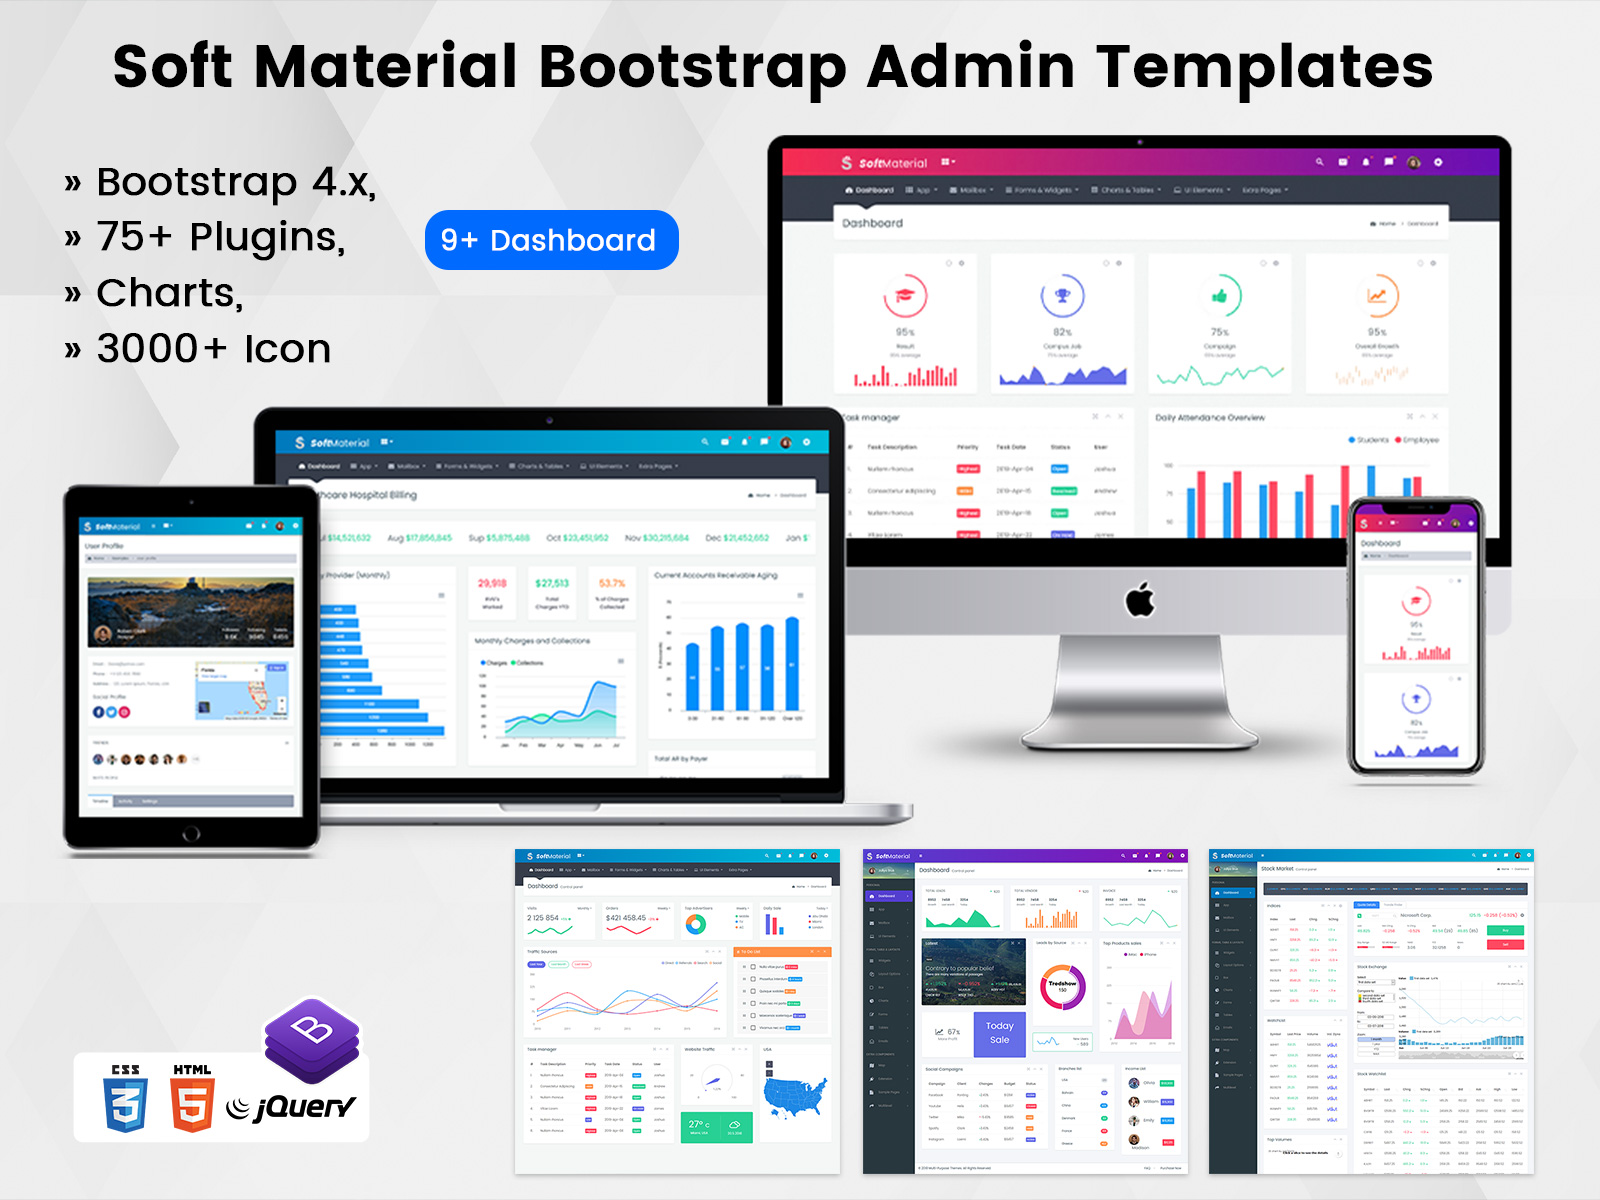 Soft Material – Admin Panel Dashboard With Bootstrap Templates